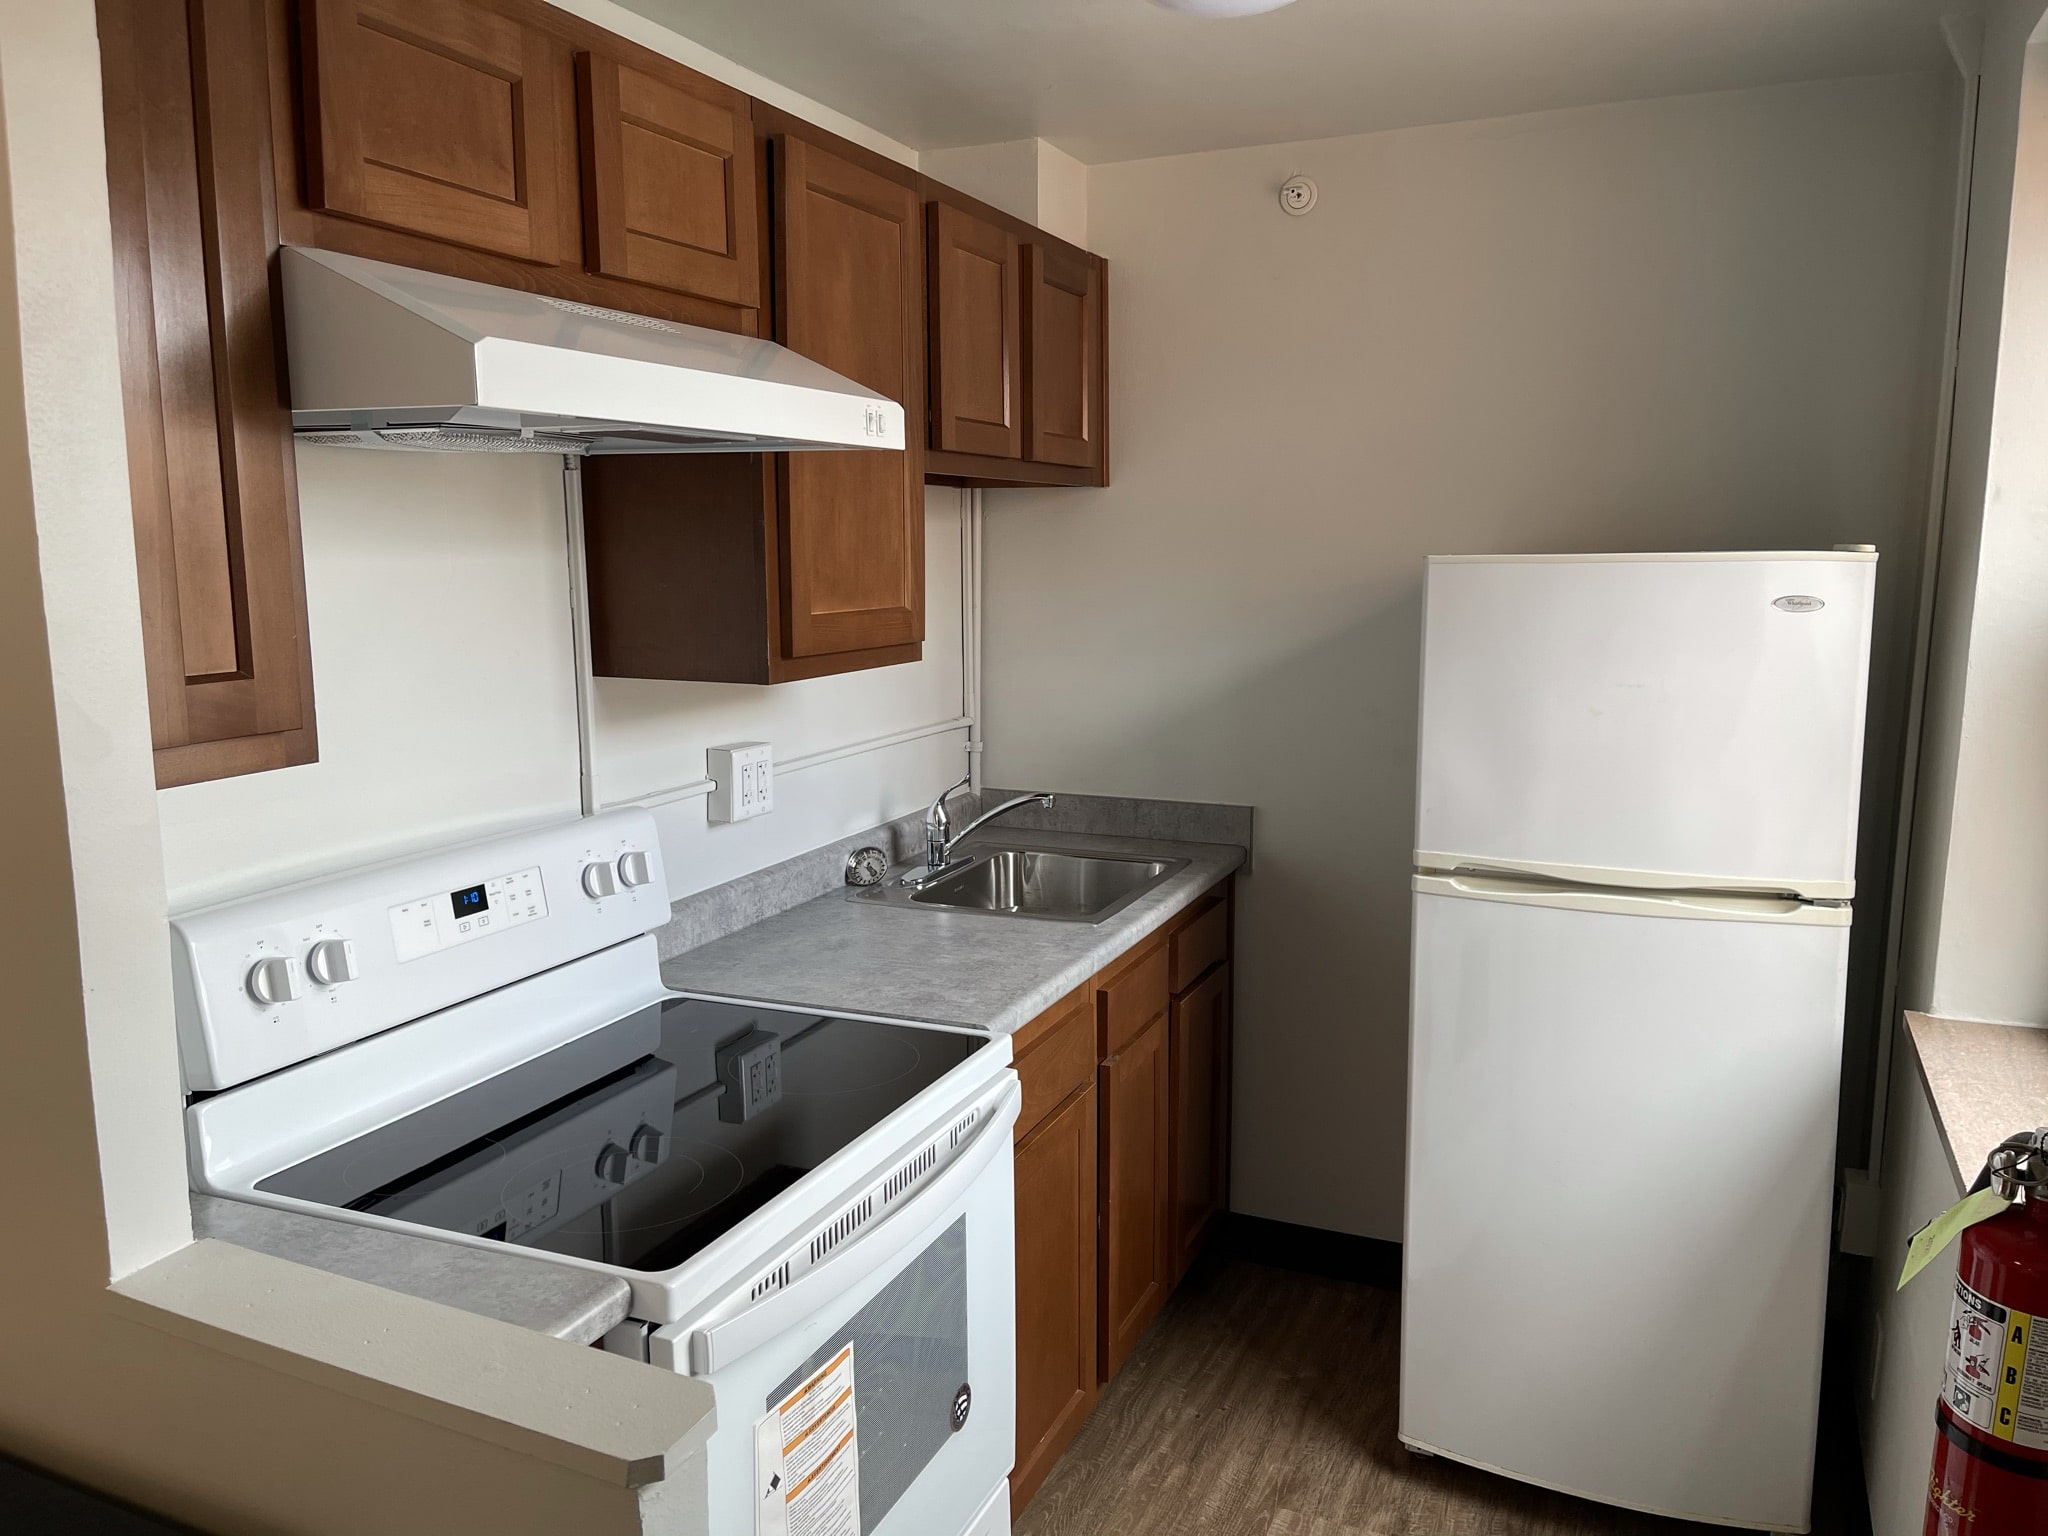 Fifth Neville Studio Apartment Kitchen - stove with overhead exhaust fan, sink, cabinets and refrigerator